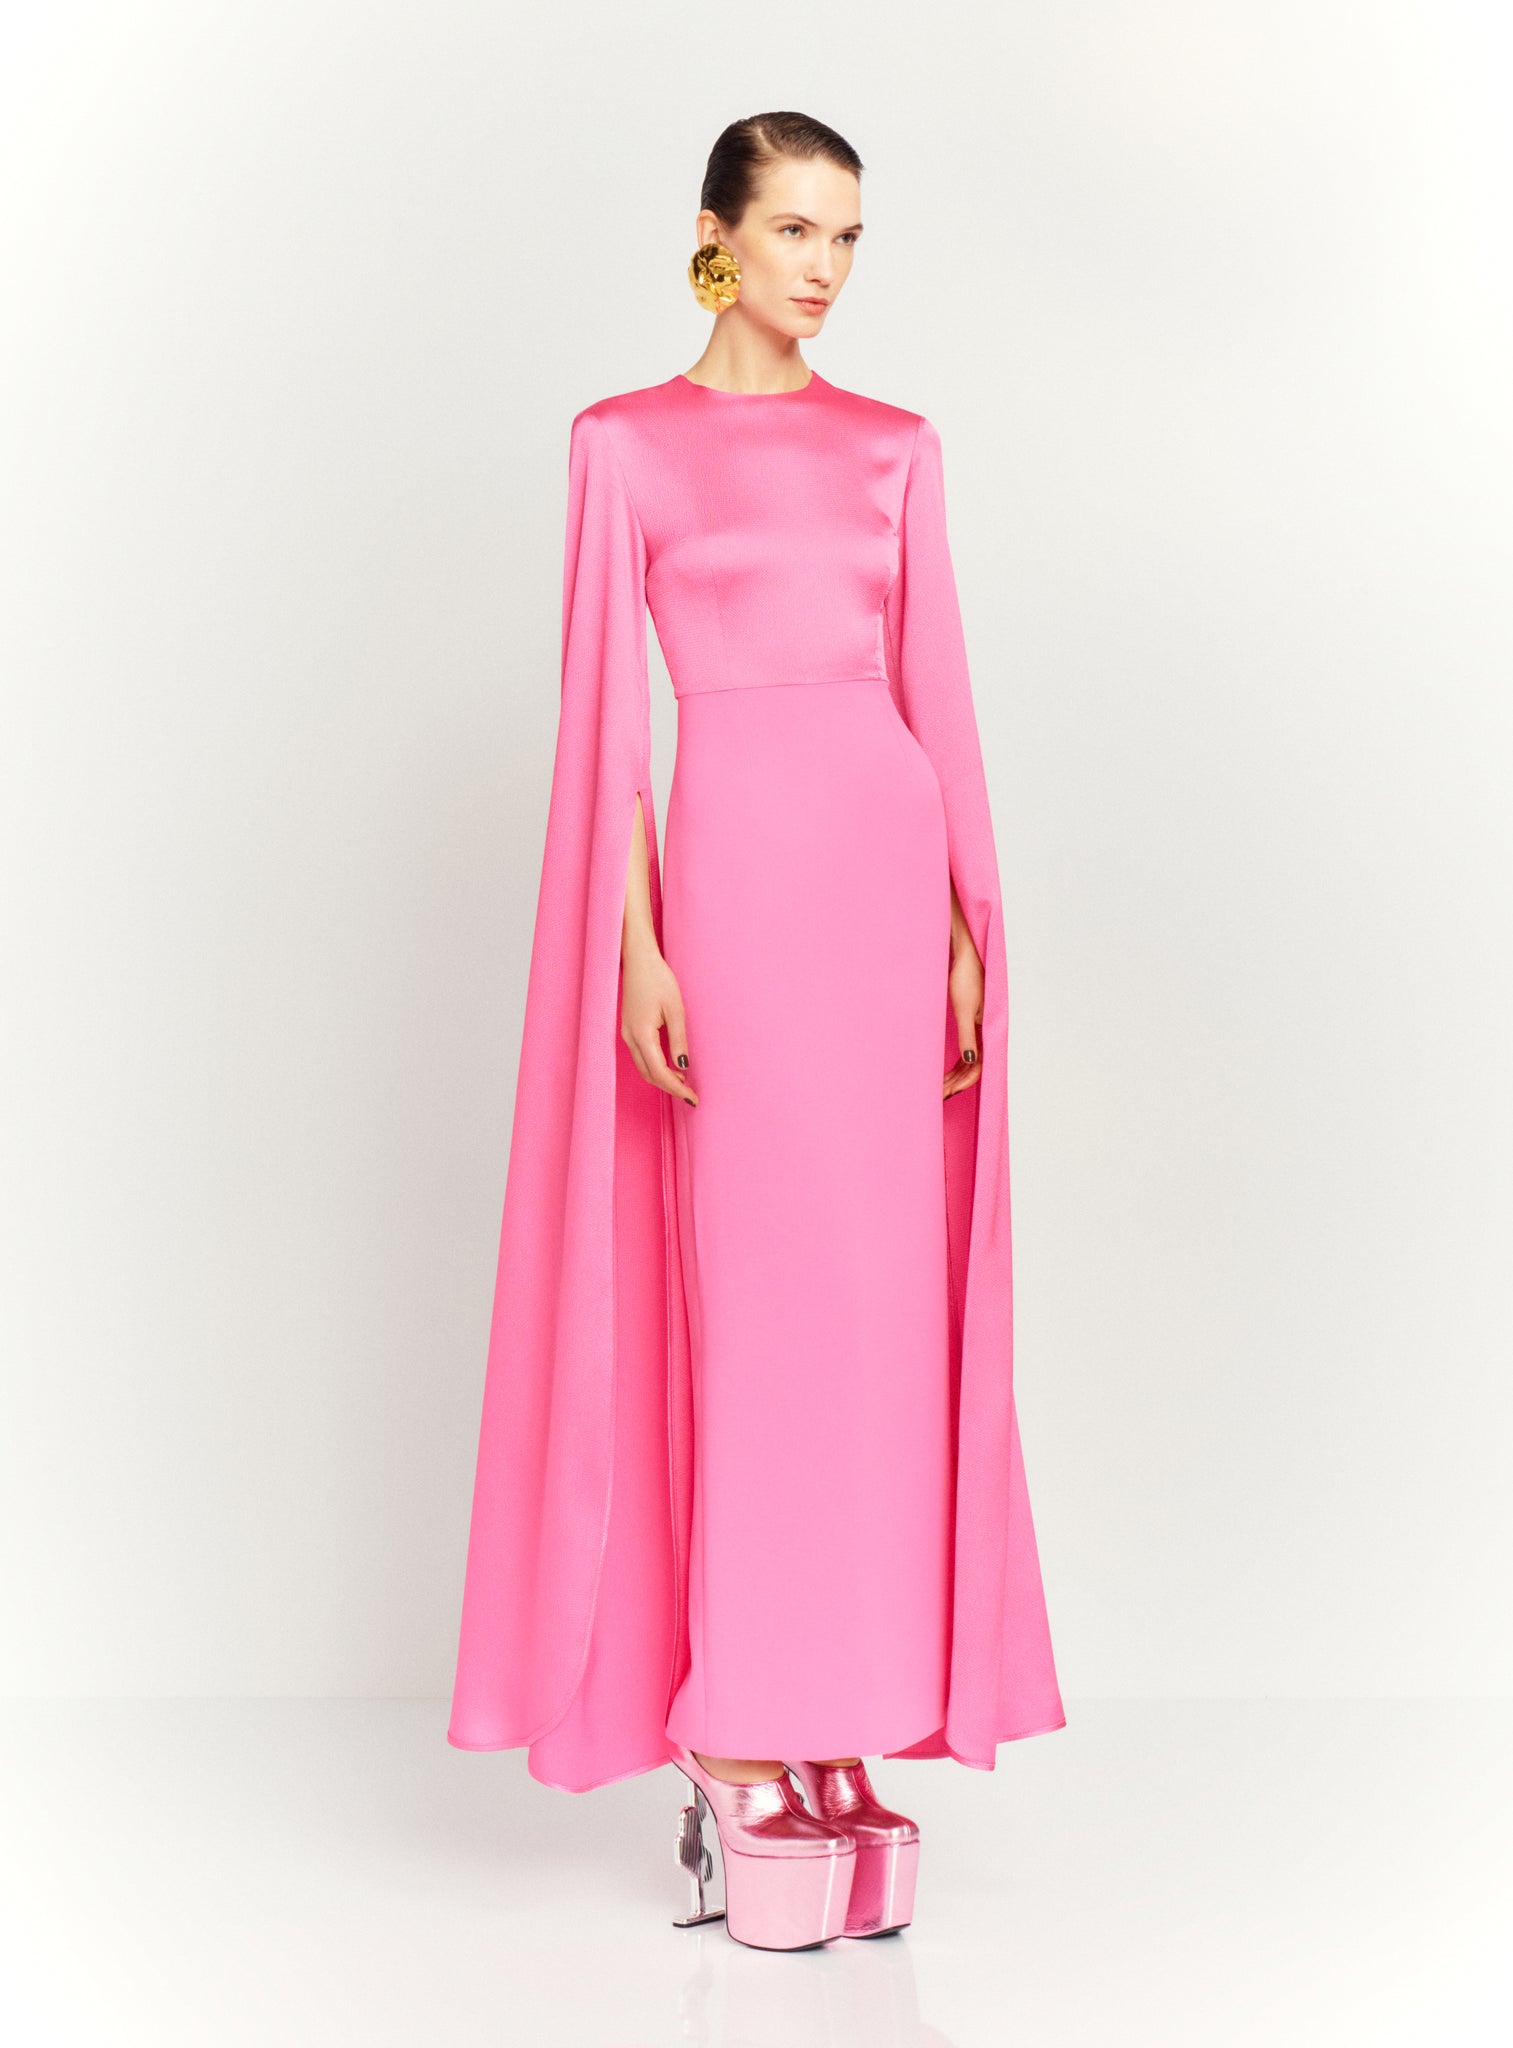 The Adley Maxi Dress in Light Pink